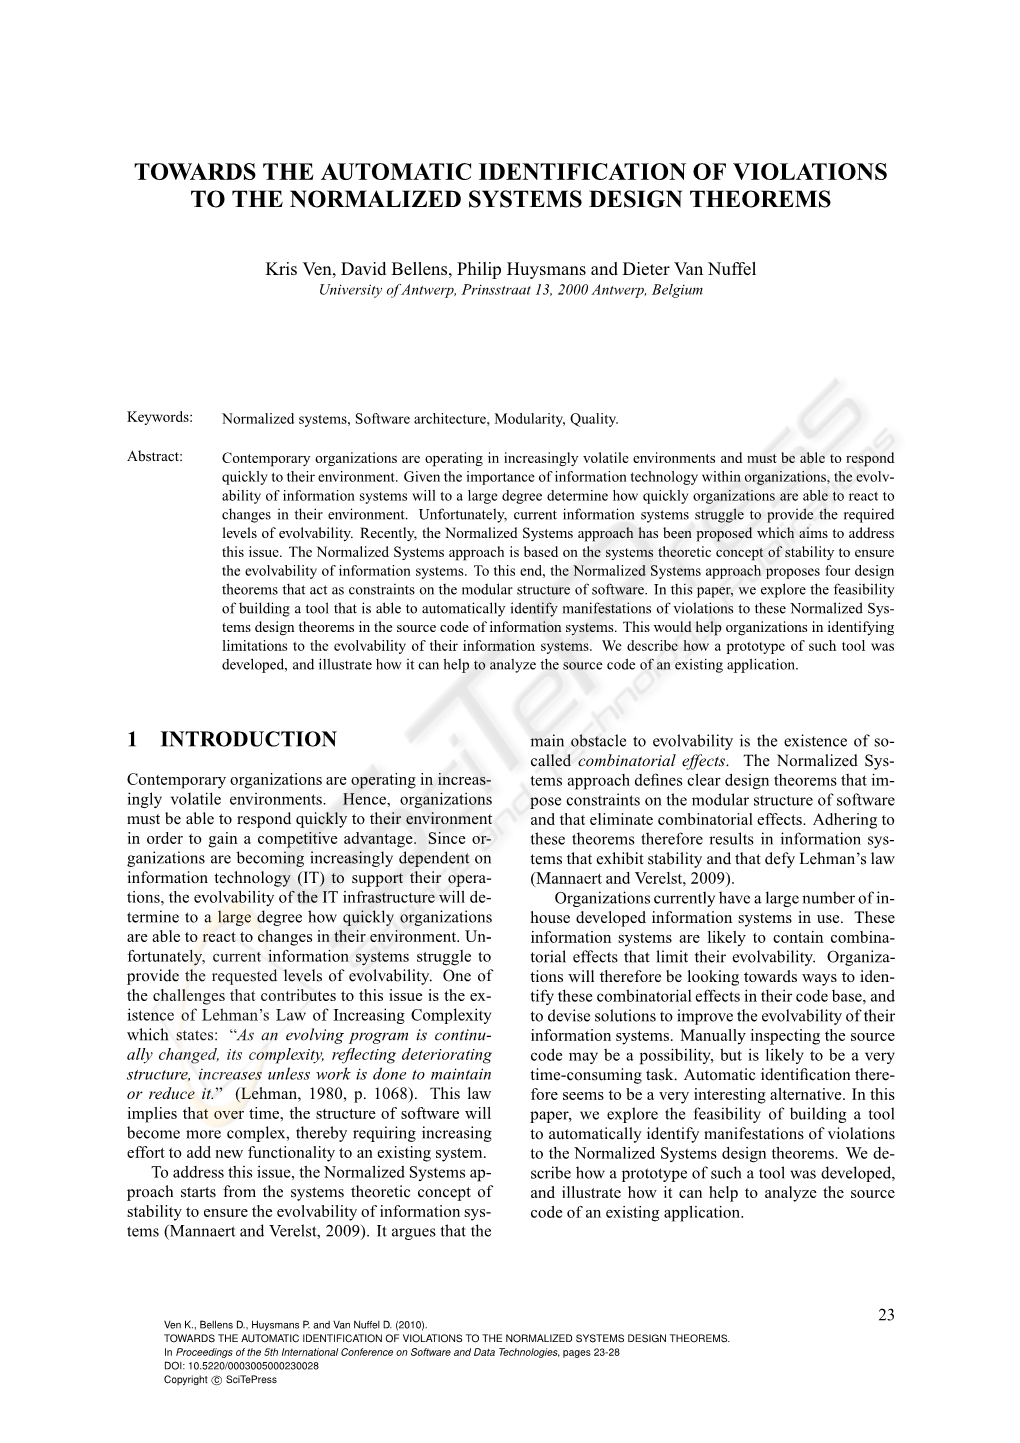 Towards the Automatic Identification of Violations to the Normalized Systems Design Theorems